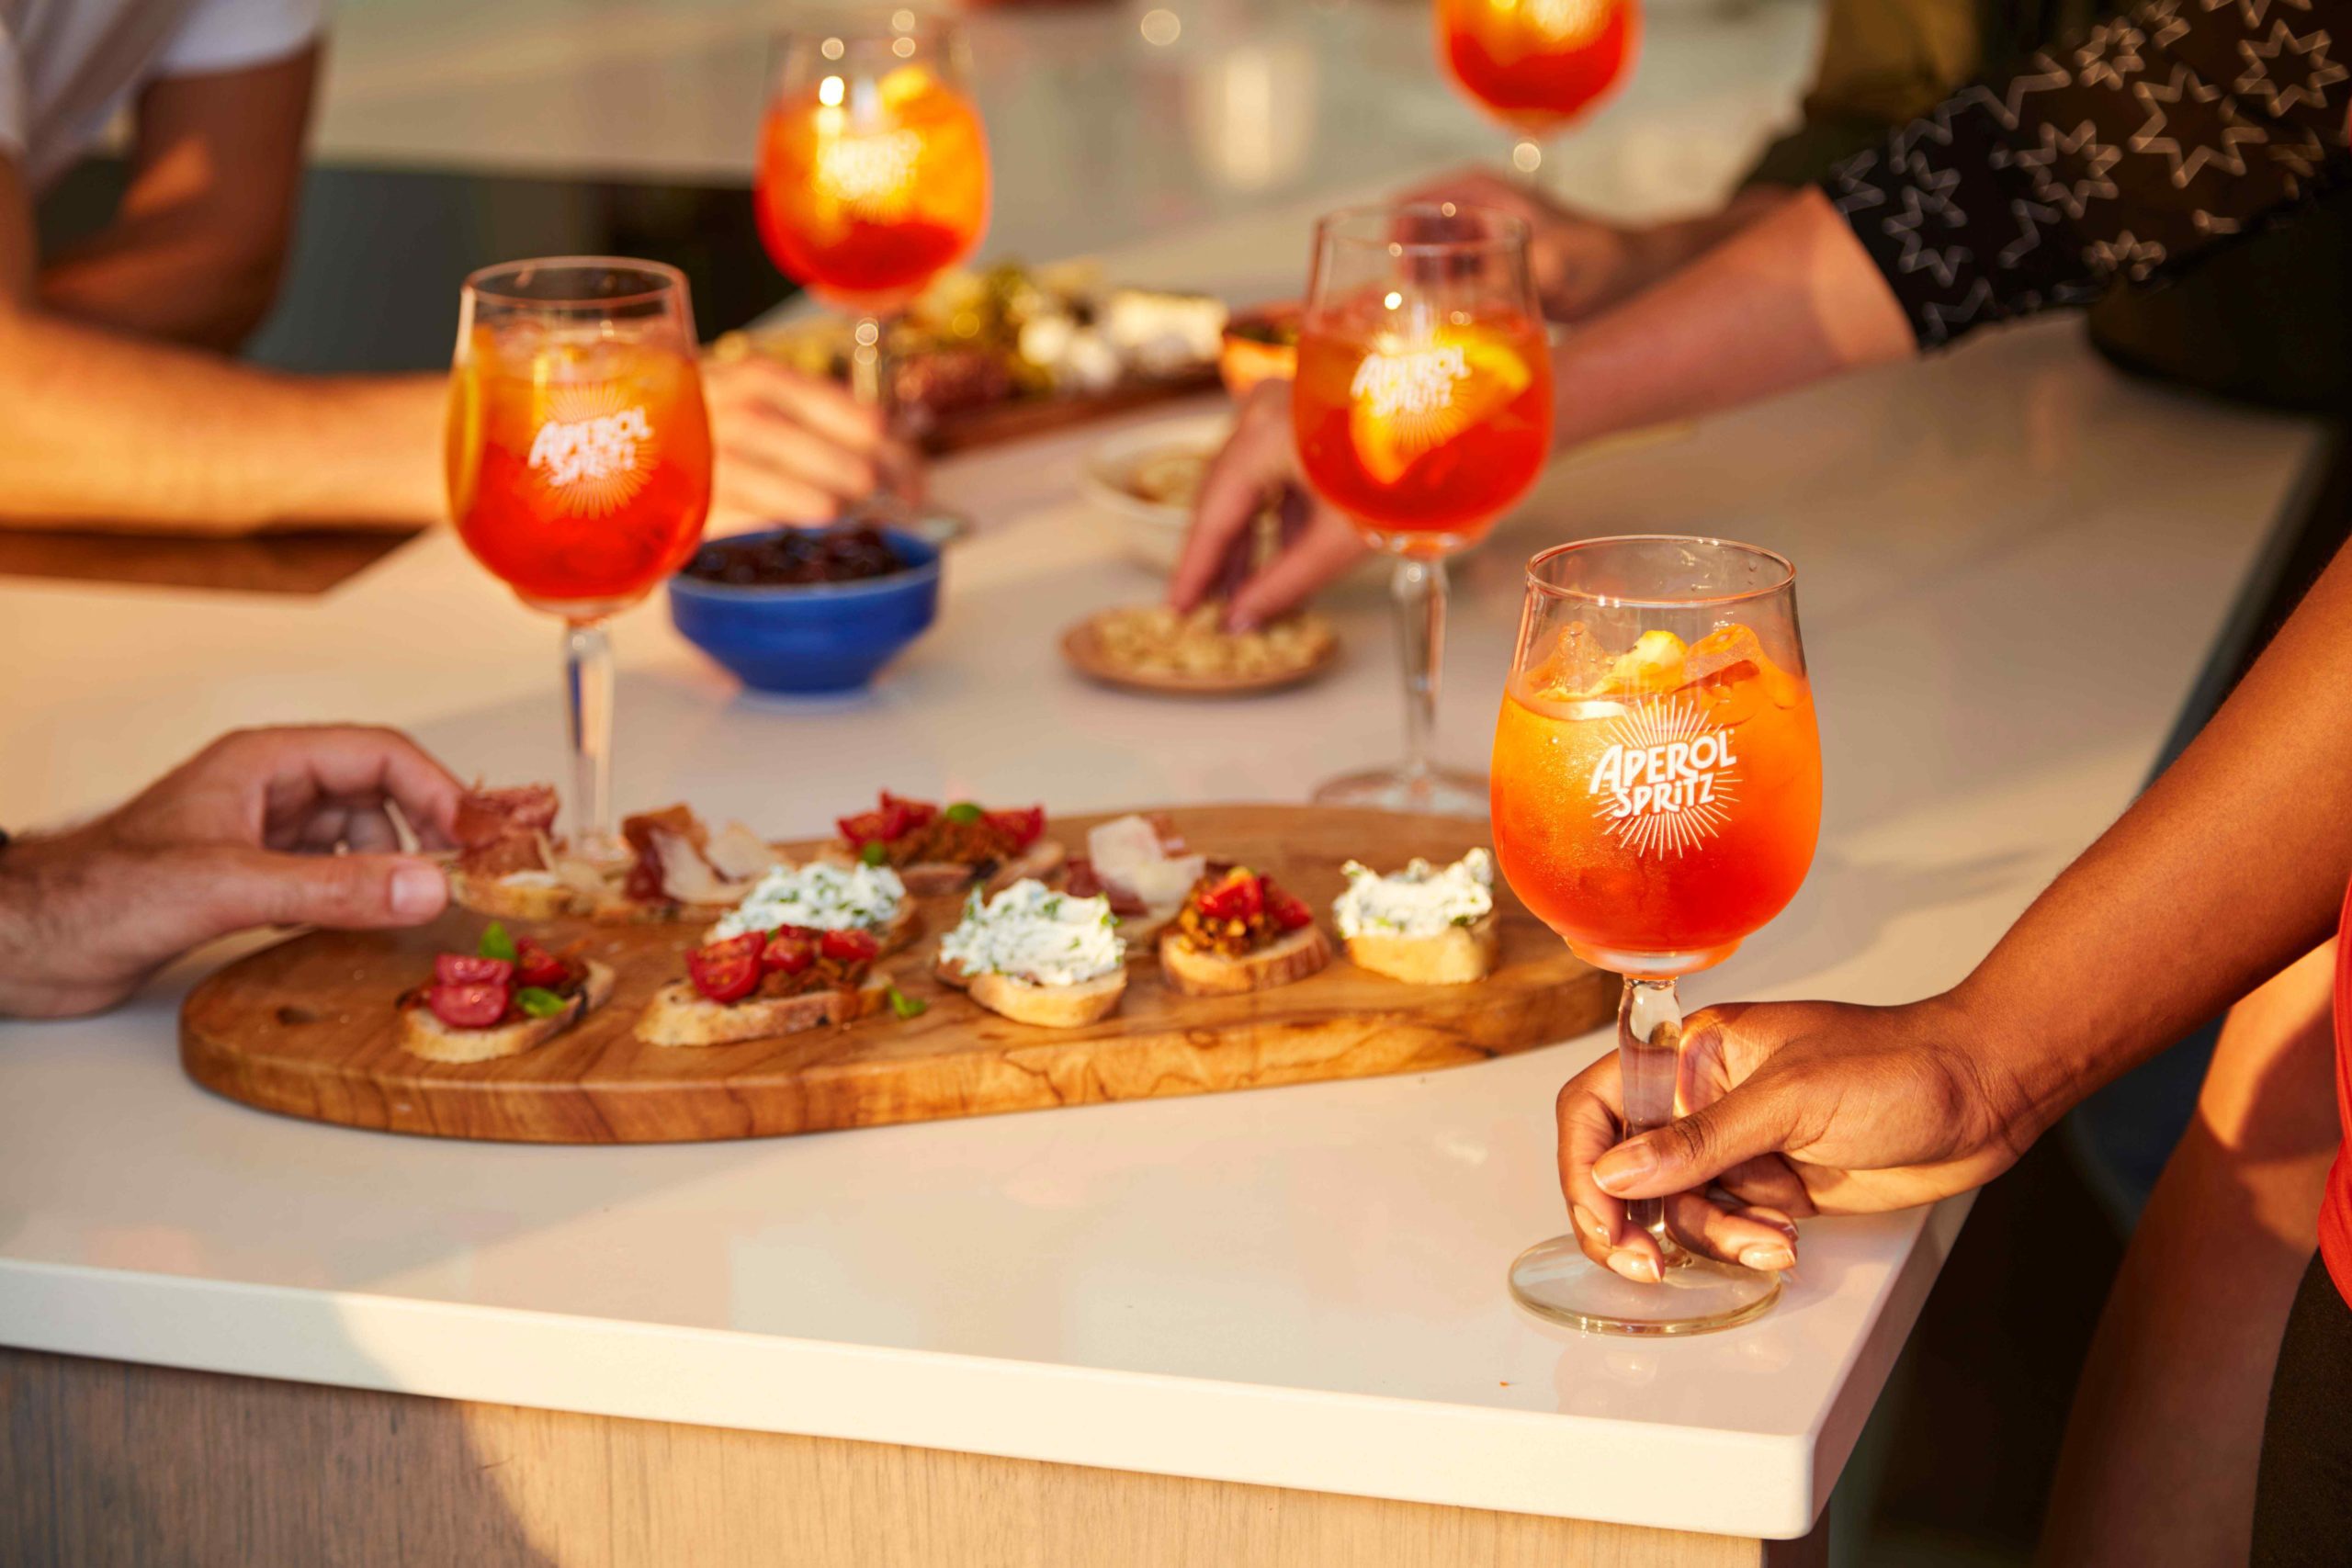 Out Of Home billboard advert by YesMore spirits Marketing Agency for Aperol Spritz showing a hands of a group of friends holding Aperol Spritz with aperitivo dishes around a kitchen counter